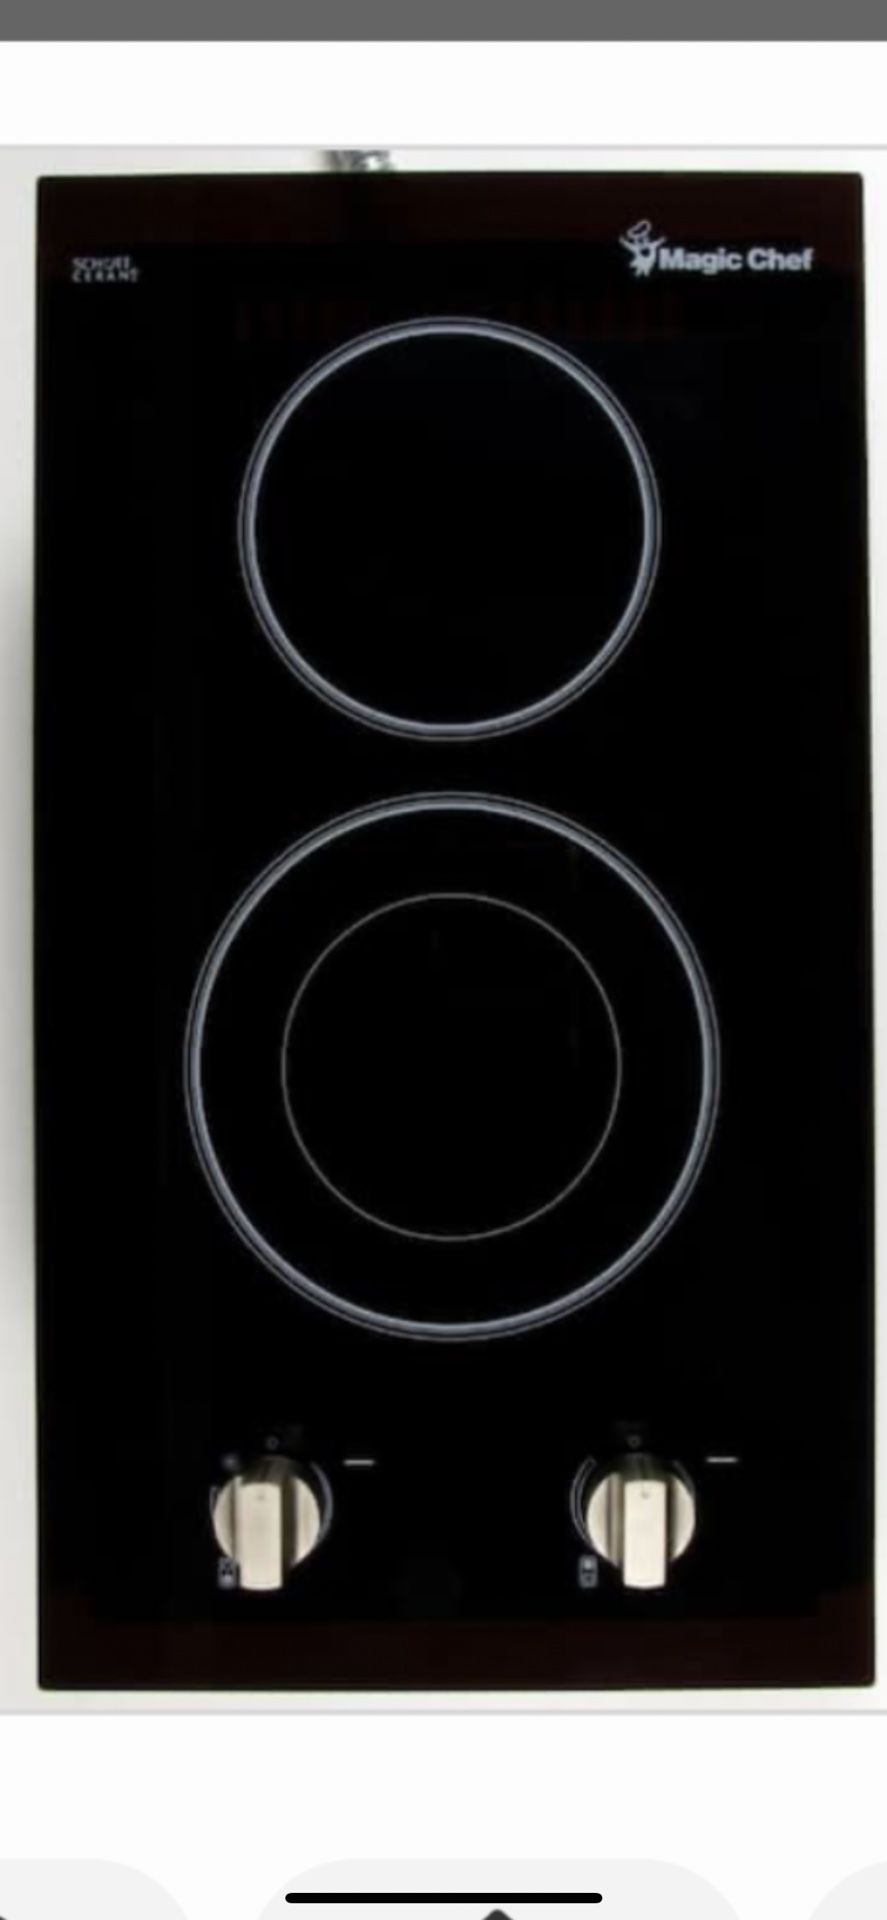 Magic Chef 12 in. Radiant Electric Ceramic Glass Cooktop in Black with 2 Elements Including Dual Radiant Element